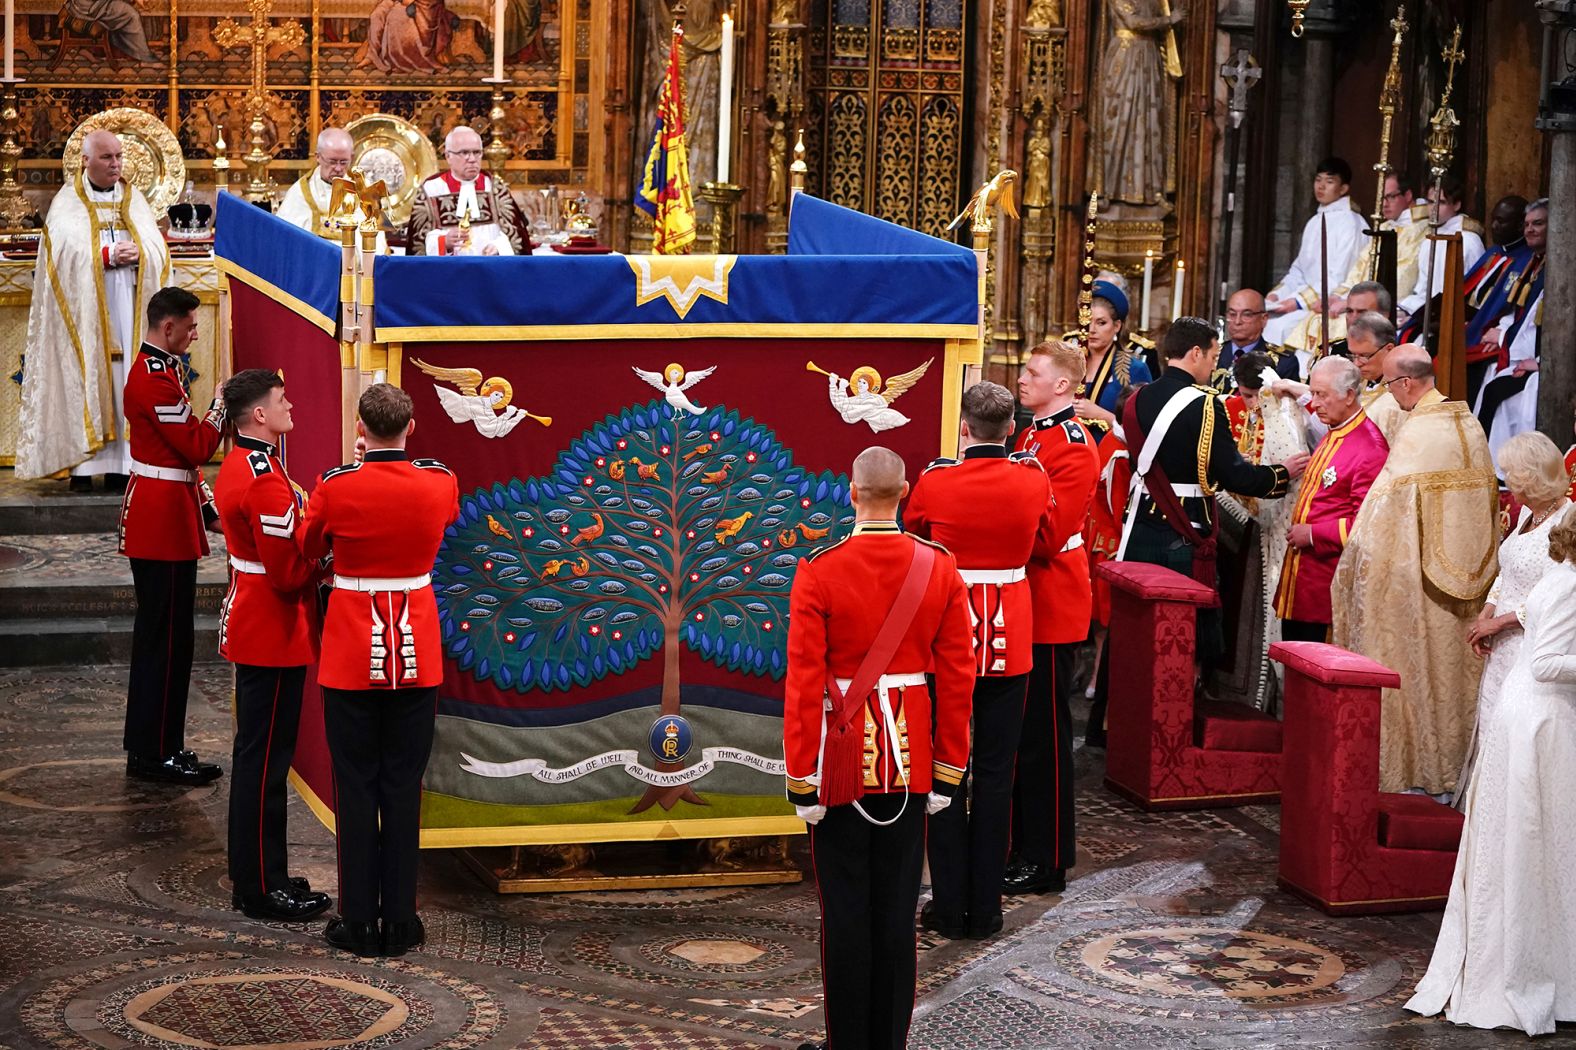 An anointing screen is erected for King Charles III at the coronation ceremony. <a href="index.php?page=&url=https%3A%2F%2Fwww.cnn.com%2Fuk%2Flive-news%2Fking-charles-iii-coronation-ckc-intl-gbr%2Fh_bf90cc361d9bb2d2940704187697b0cd" target="_blank">The most sacred part of the service</a> — the anointing — took place behind the screen.